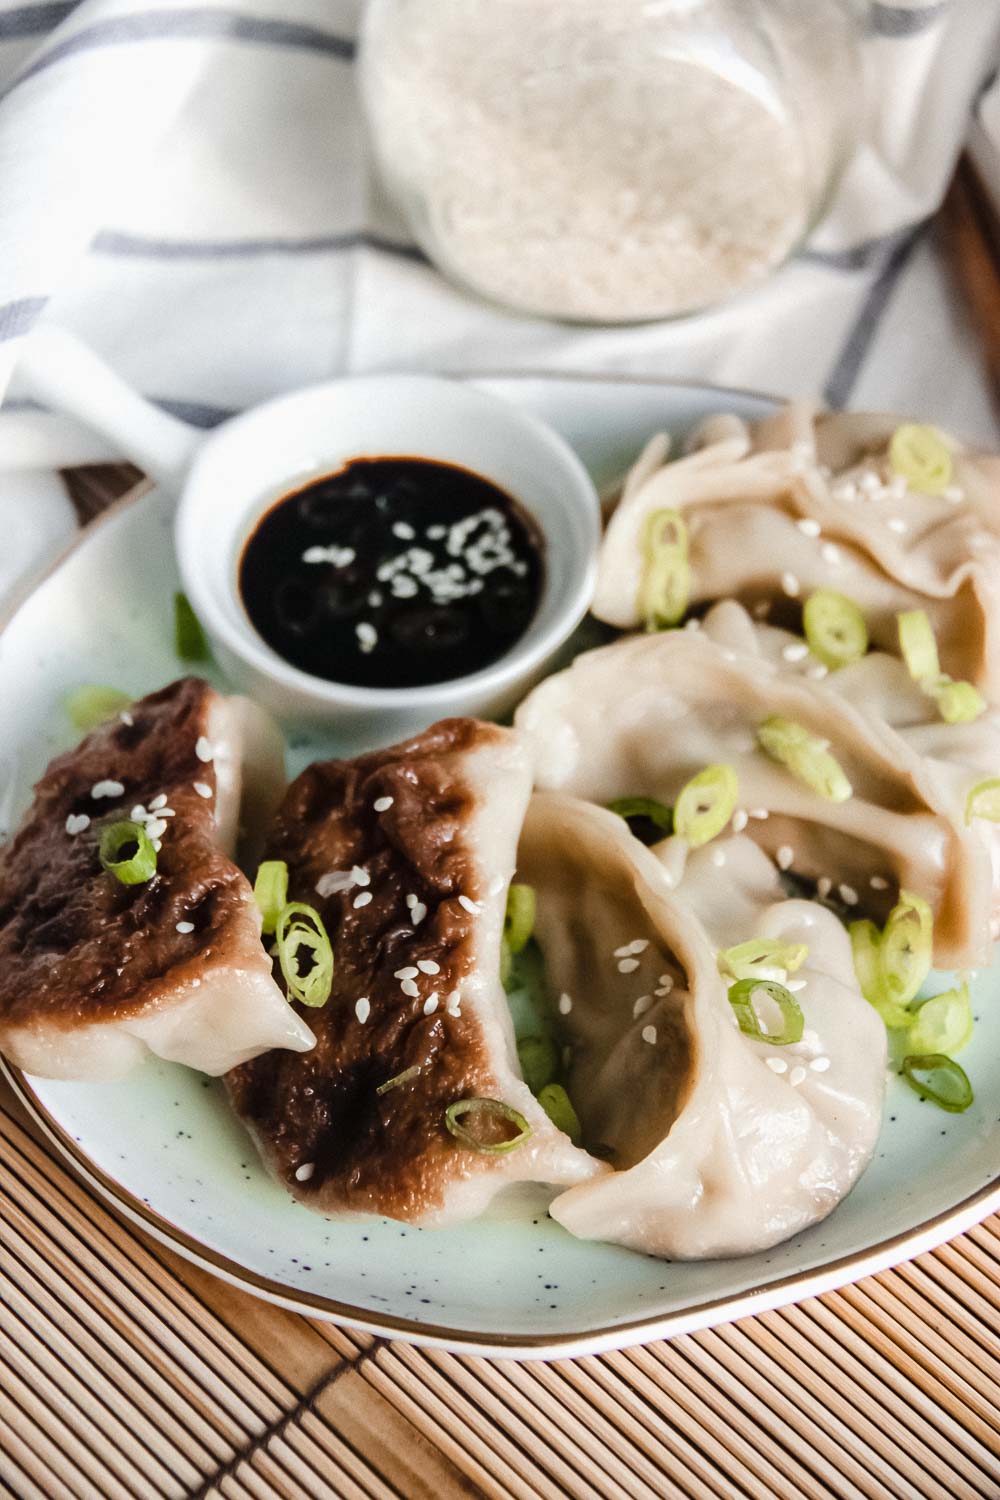 A homemade pan-fried Tuna Potstickers are a flavor-packed and savory potsticker recipe. They make an easy freezer-friendly appetizer, and now there’s no need to order takeout and just make your own.